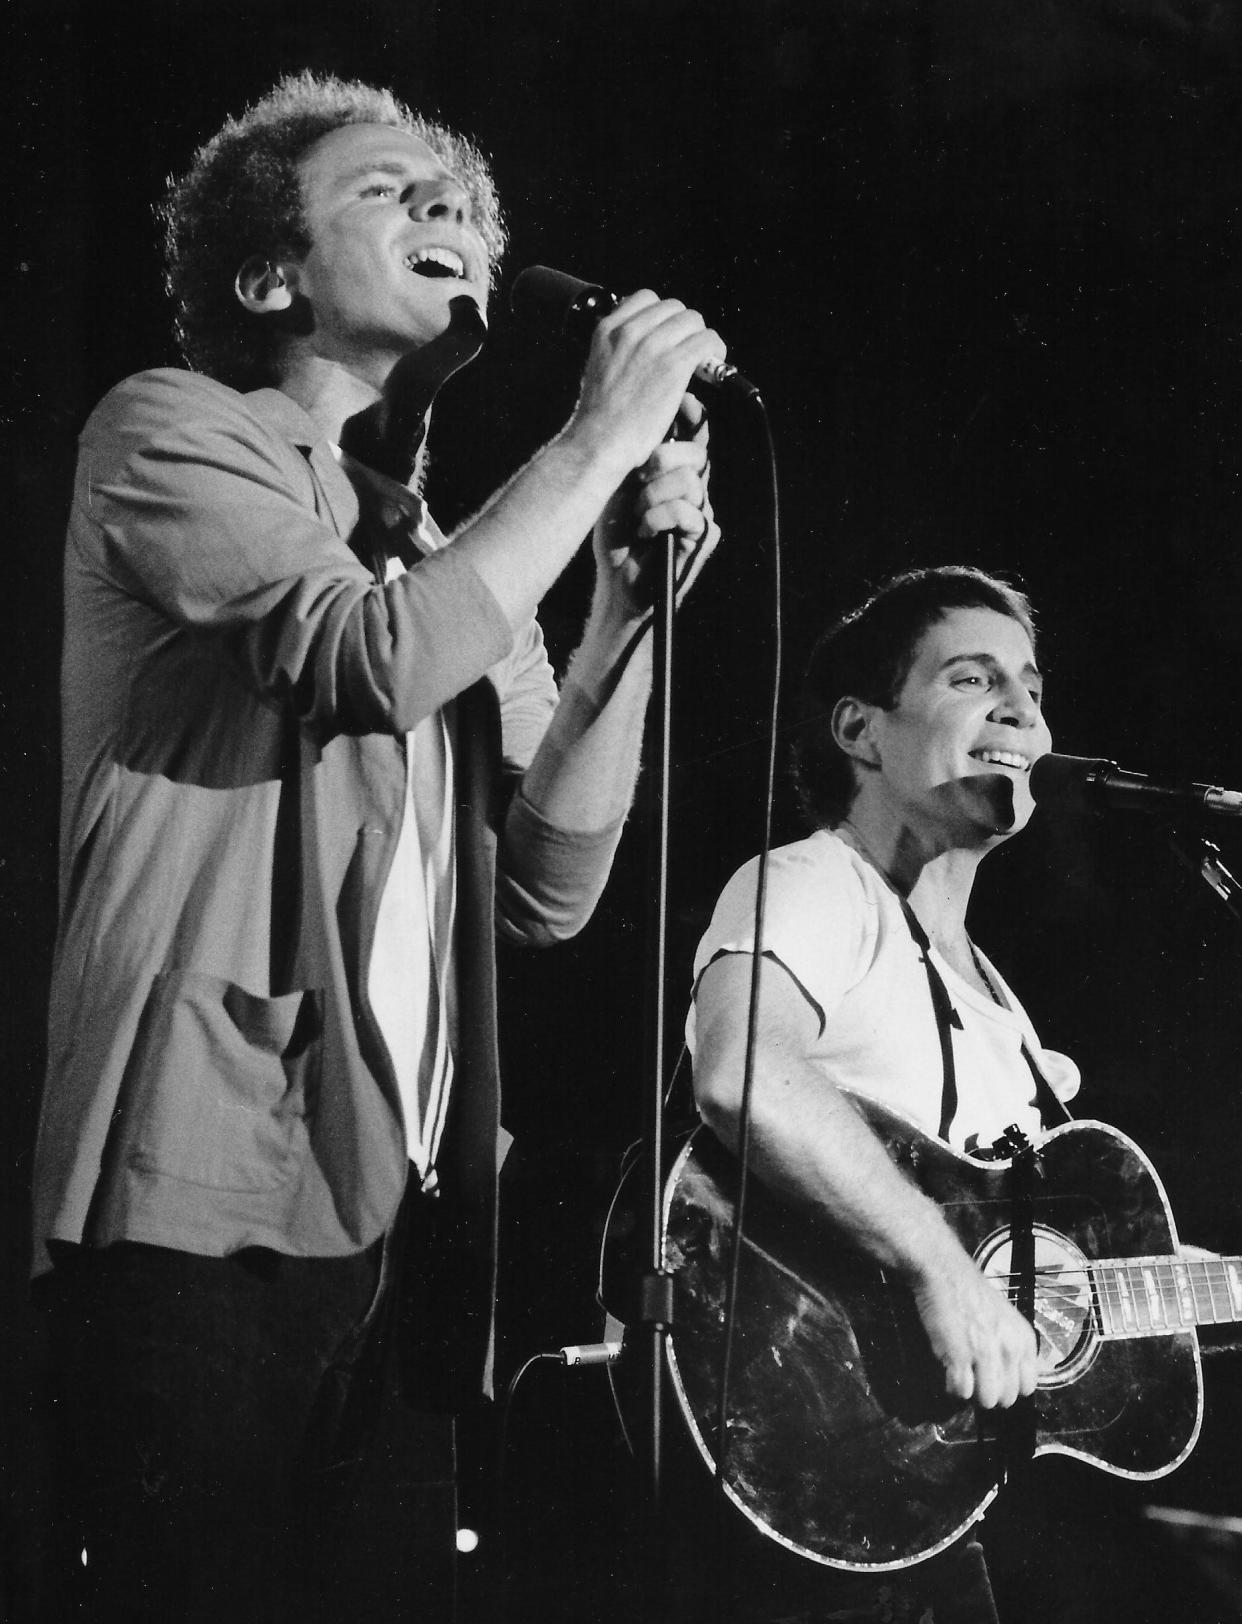 Art Garfunkel and Paul Simon perform July 19, 1983, at the Rubber Bowl in Akron.